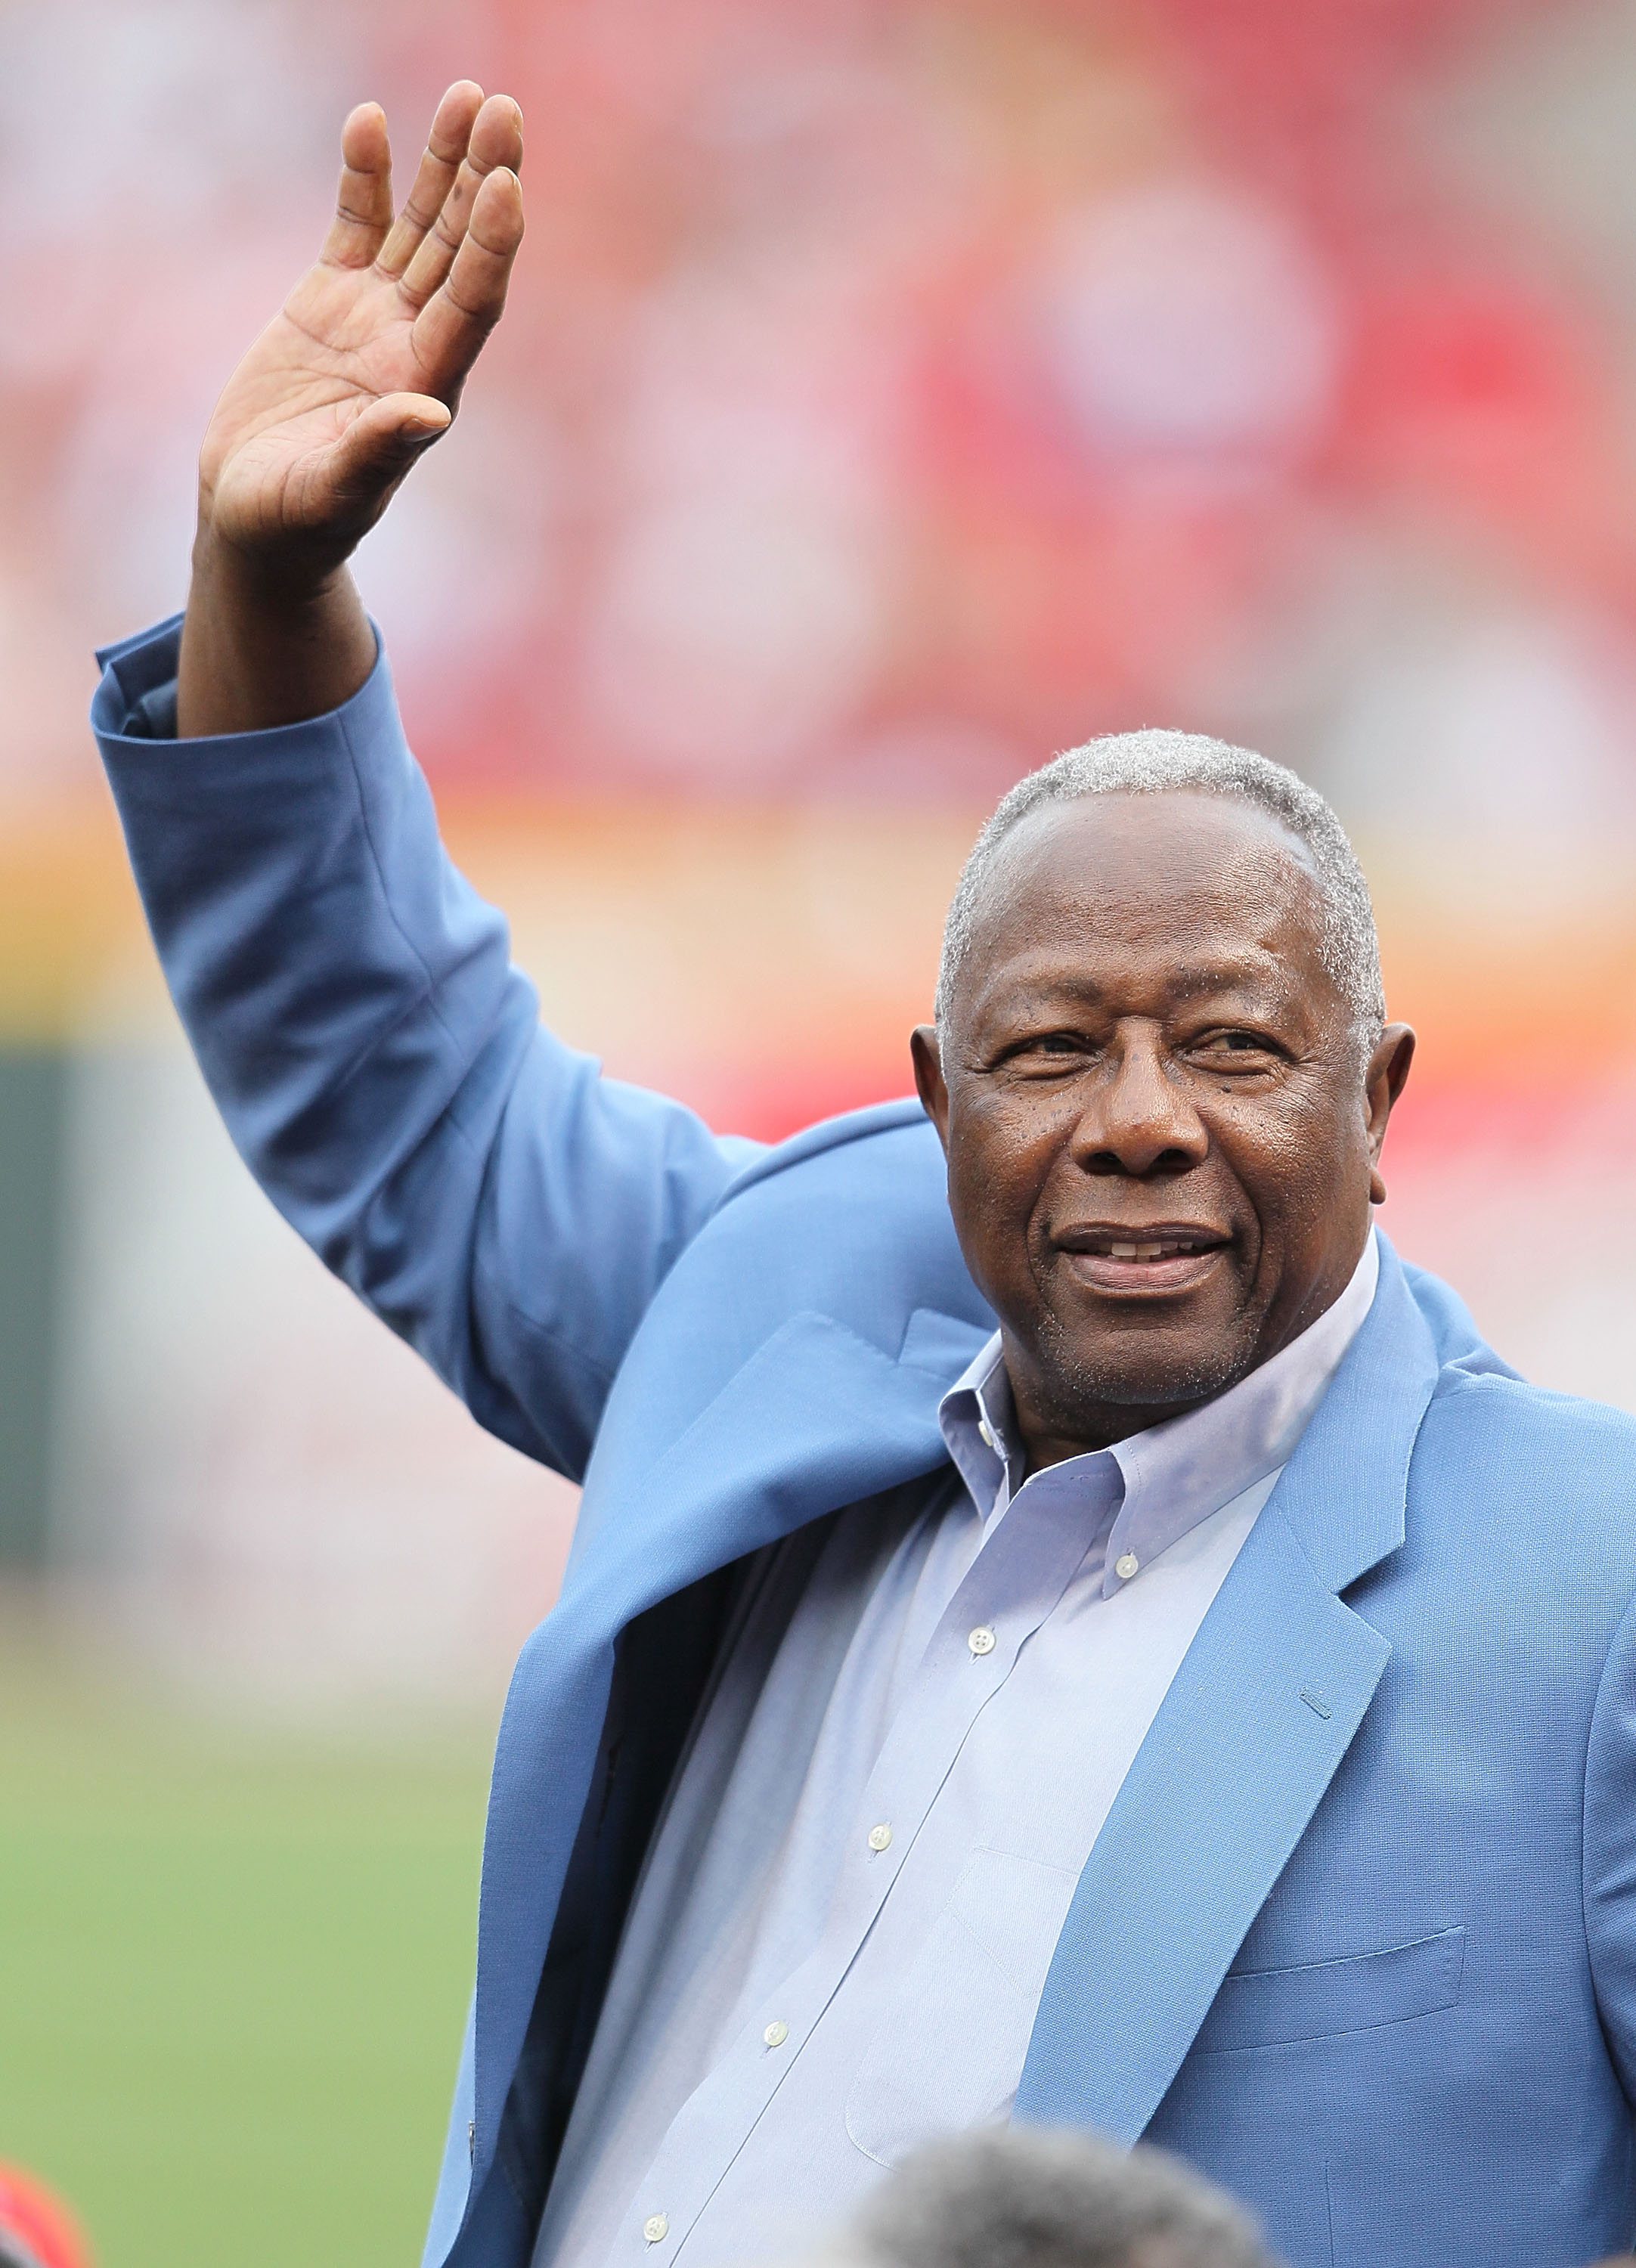 CINCINNATI - MAY 15: Hank Aaron waves to the crowd before the Gillette Civil Rights Game between the Cincinnati Reds and the St. Louis Cardinals at Great American Ball Park on May 15, 2010 in Cincinnati, Ohio.  (Photo by Andy Lyons/Getty Images)